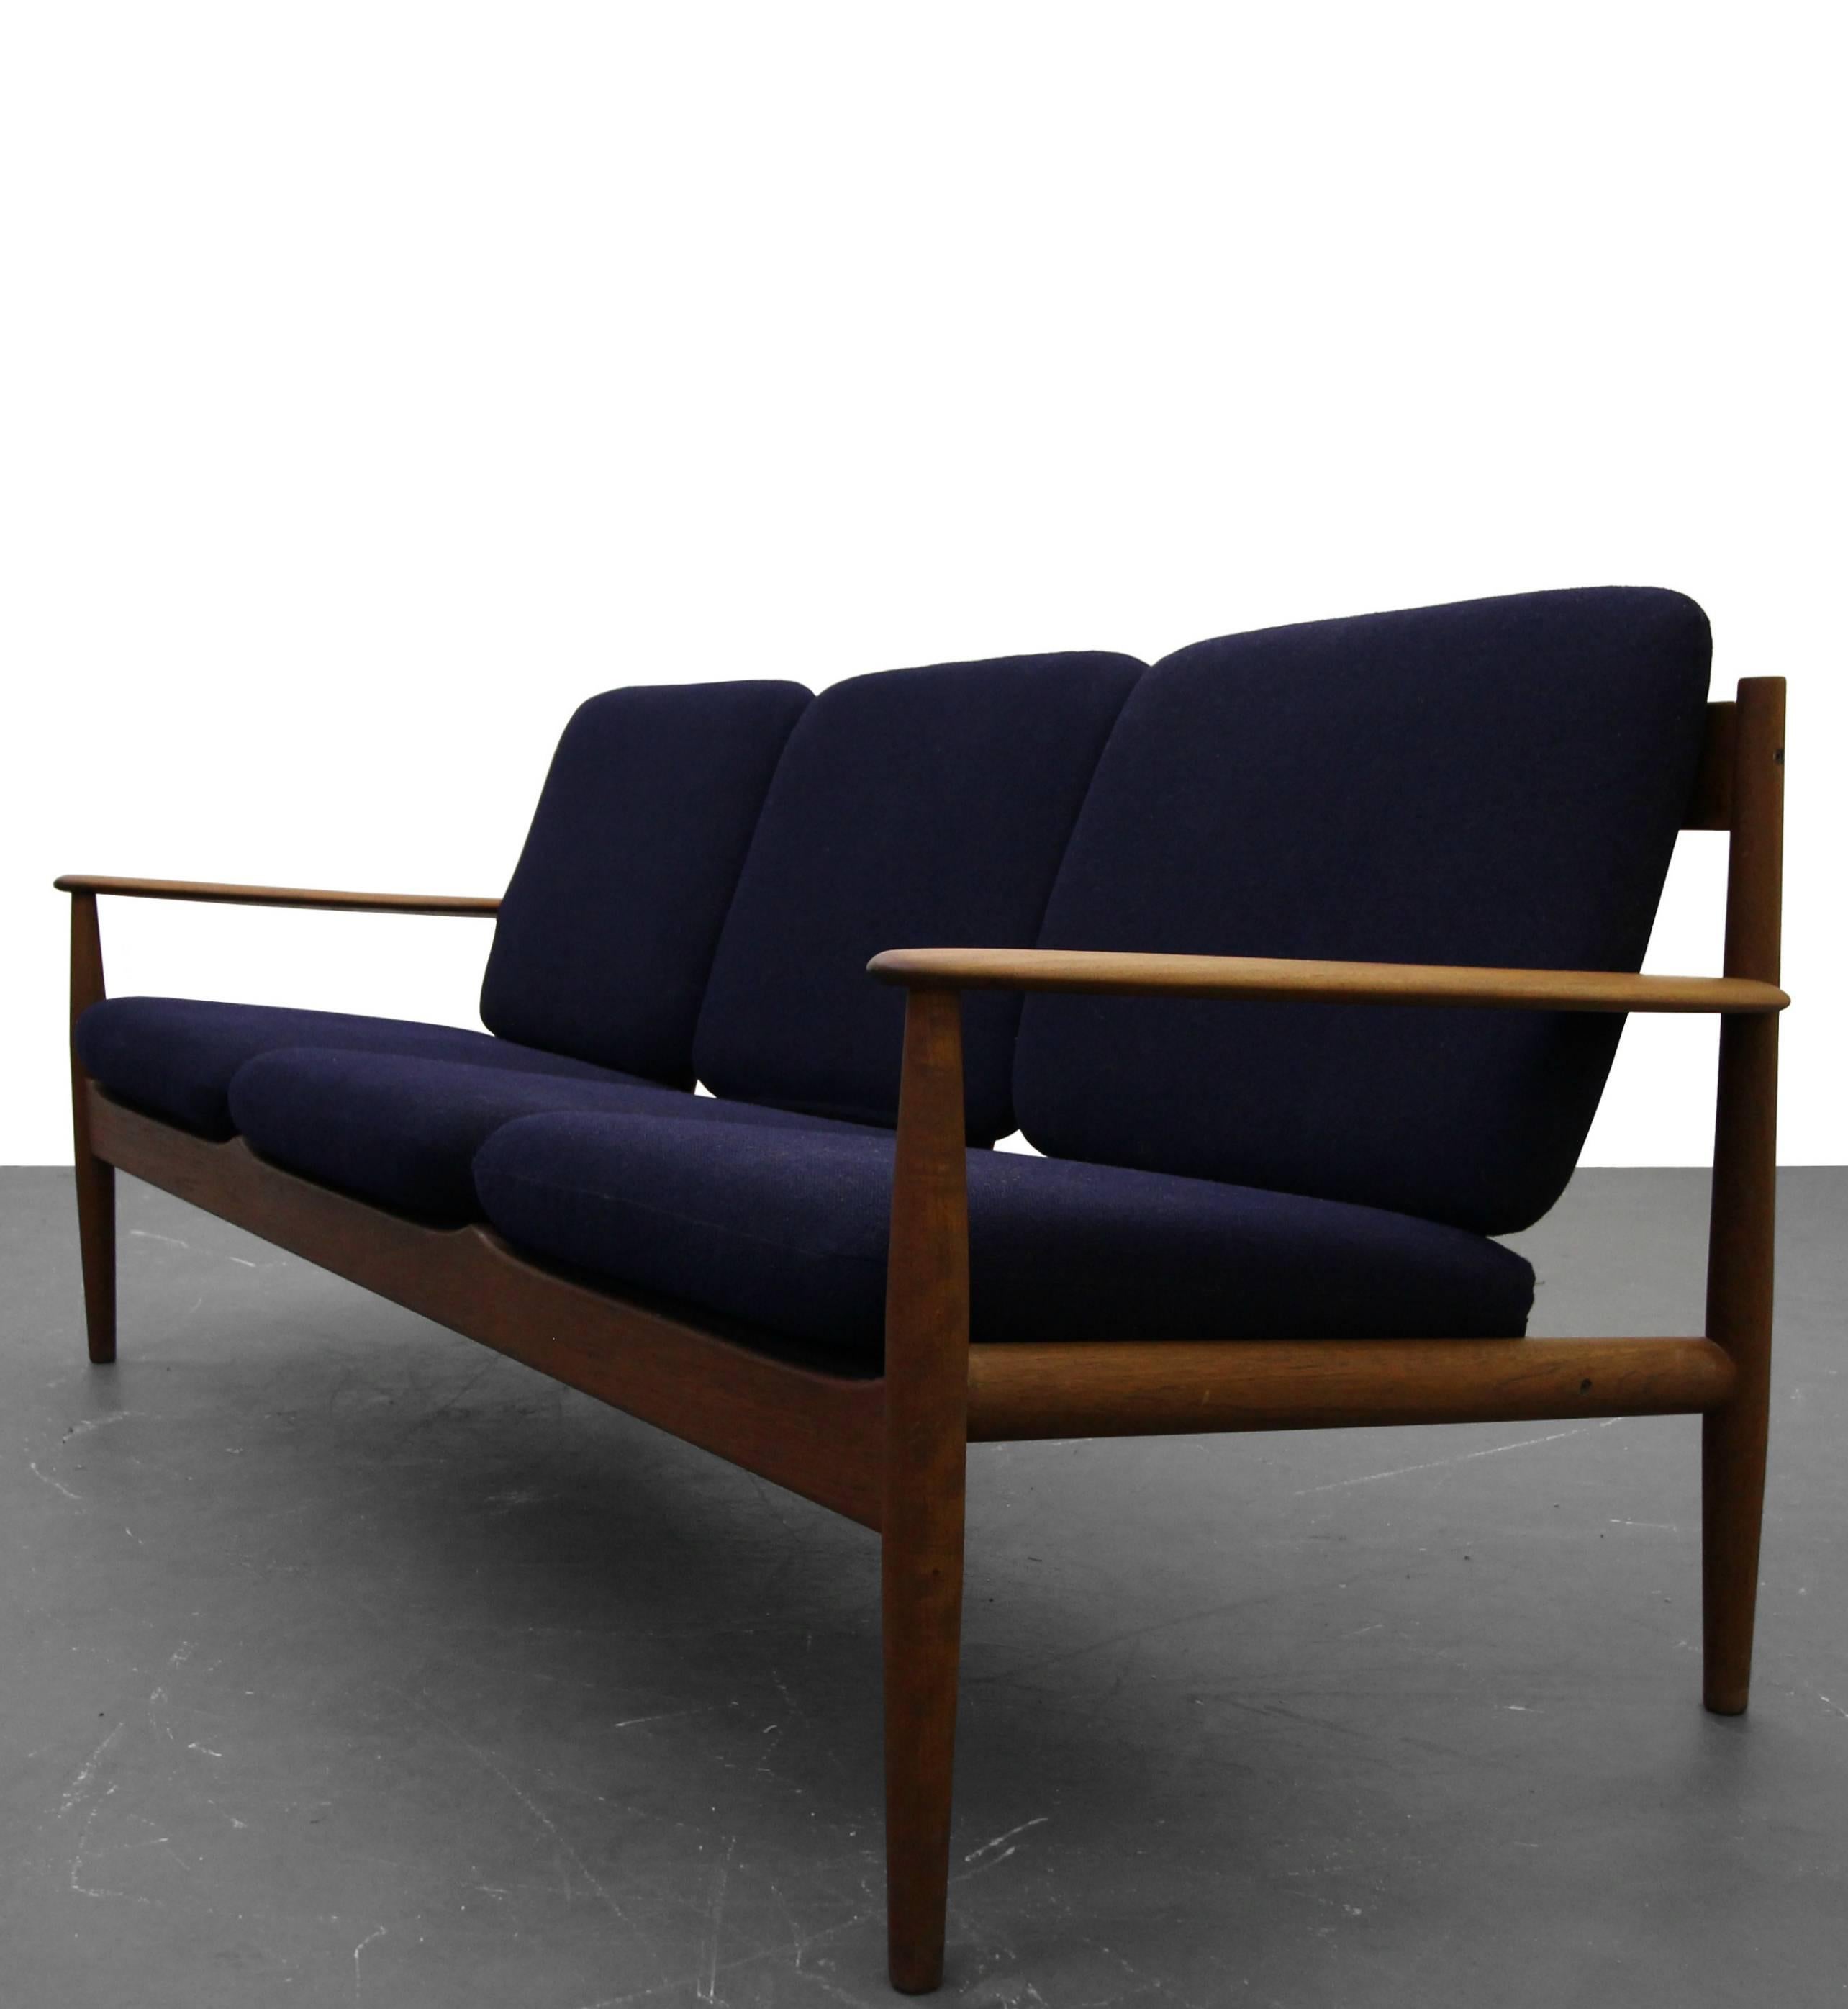 This is the classically perfect, solid teak, Danish sofa designed by Grete Jalk for France & Son. This is a beautifully designed sofa with gorgeous curvature details on the open slat back. This sofa is a simple and clean Danish design that will